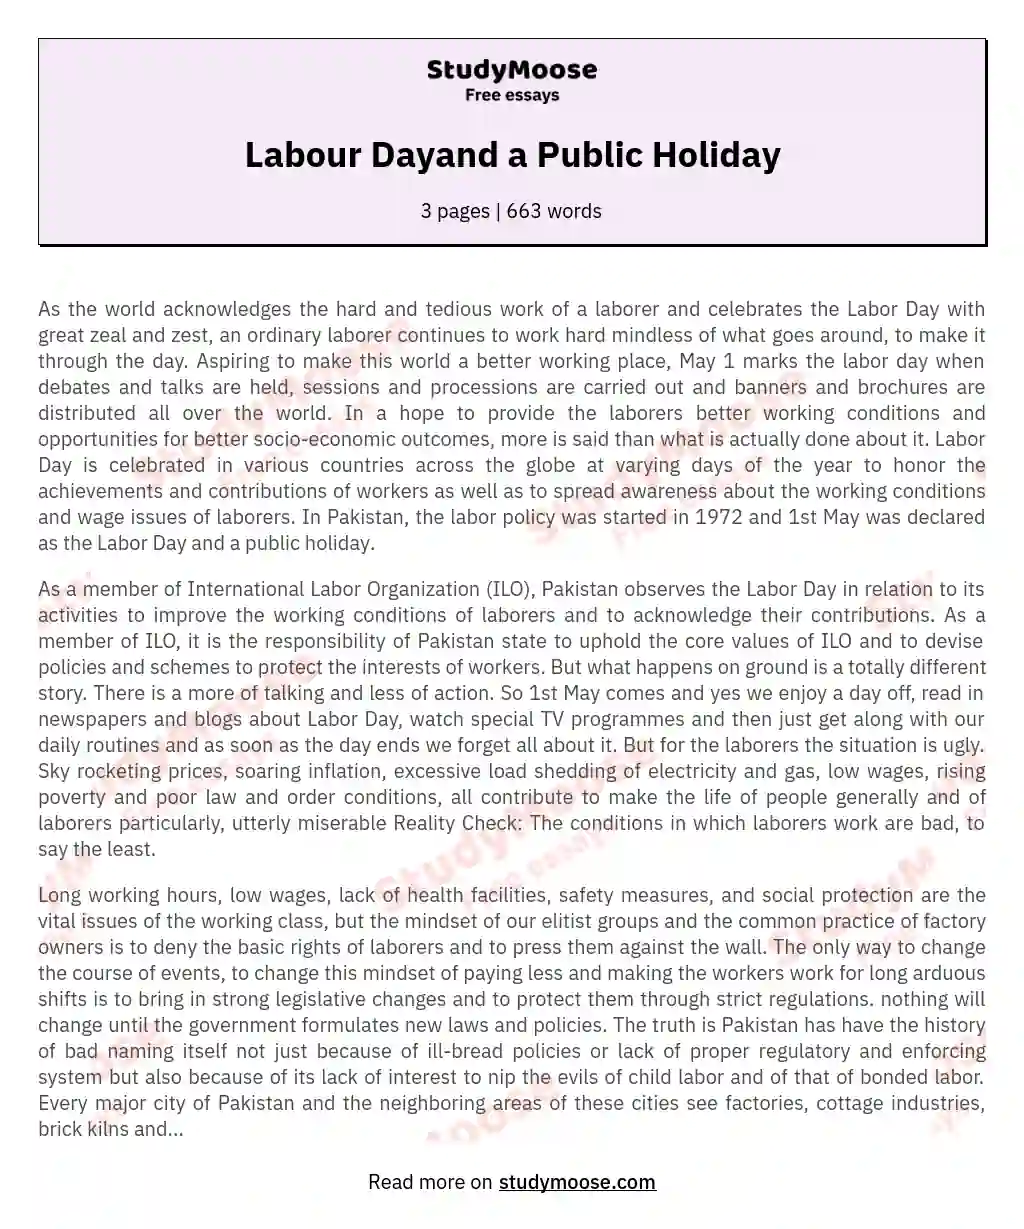 Labour Dayand a Public Holiday essay